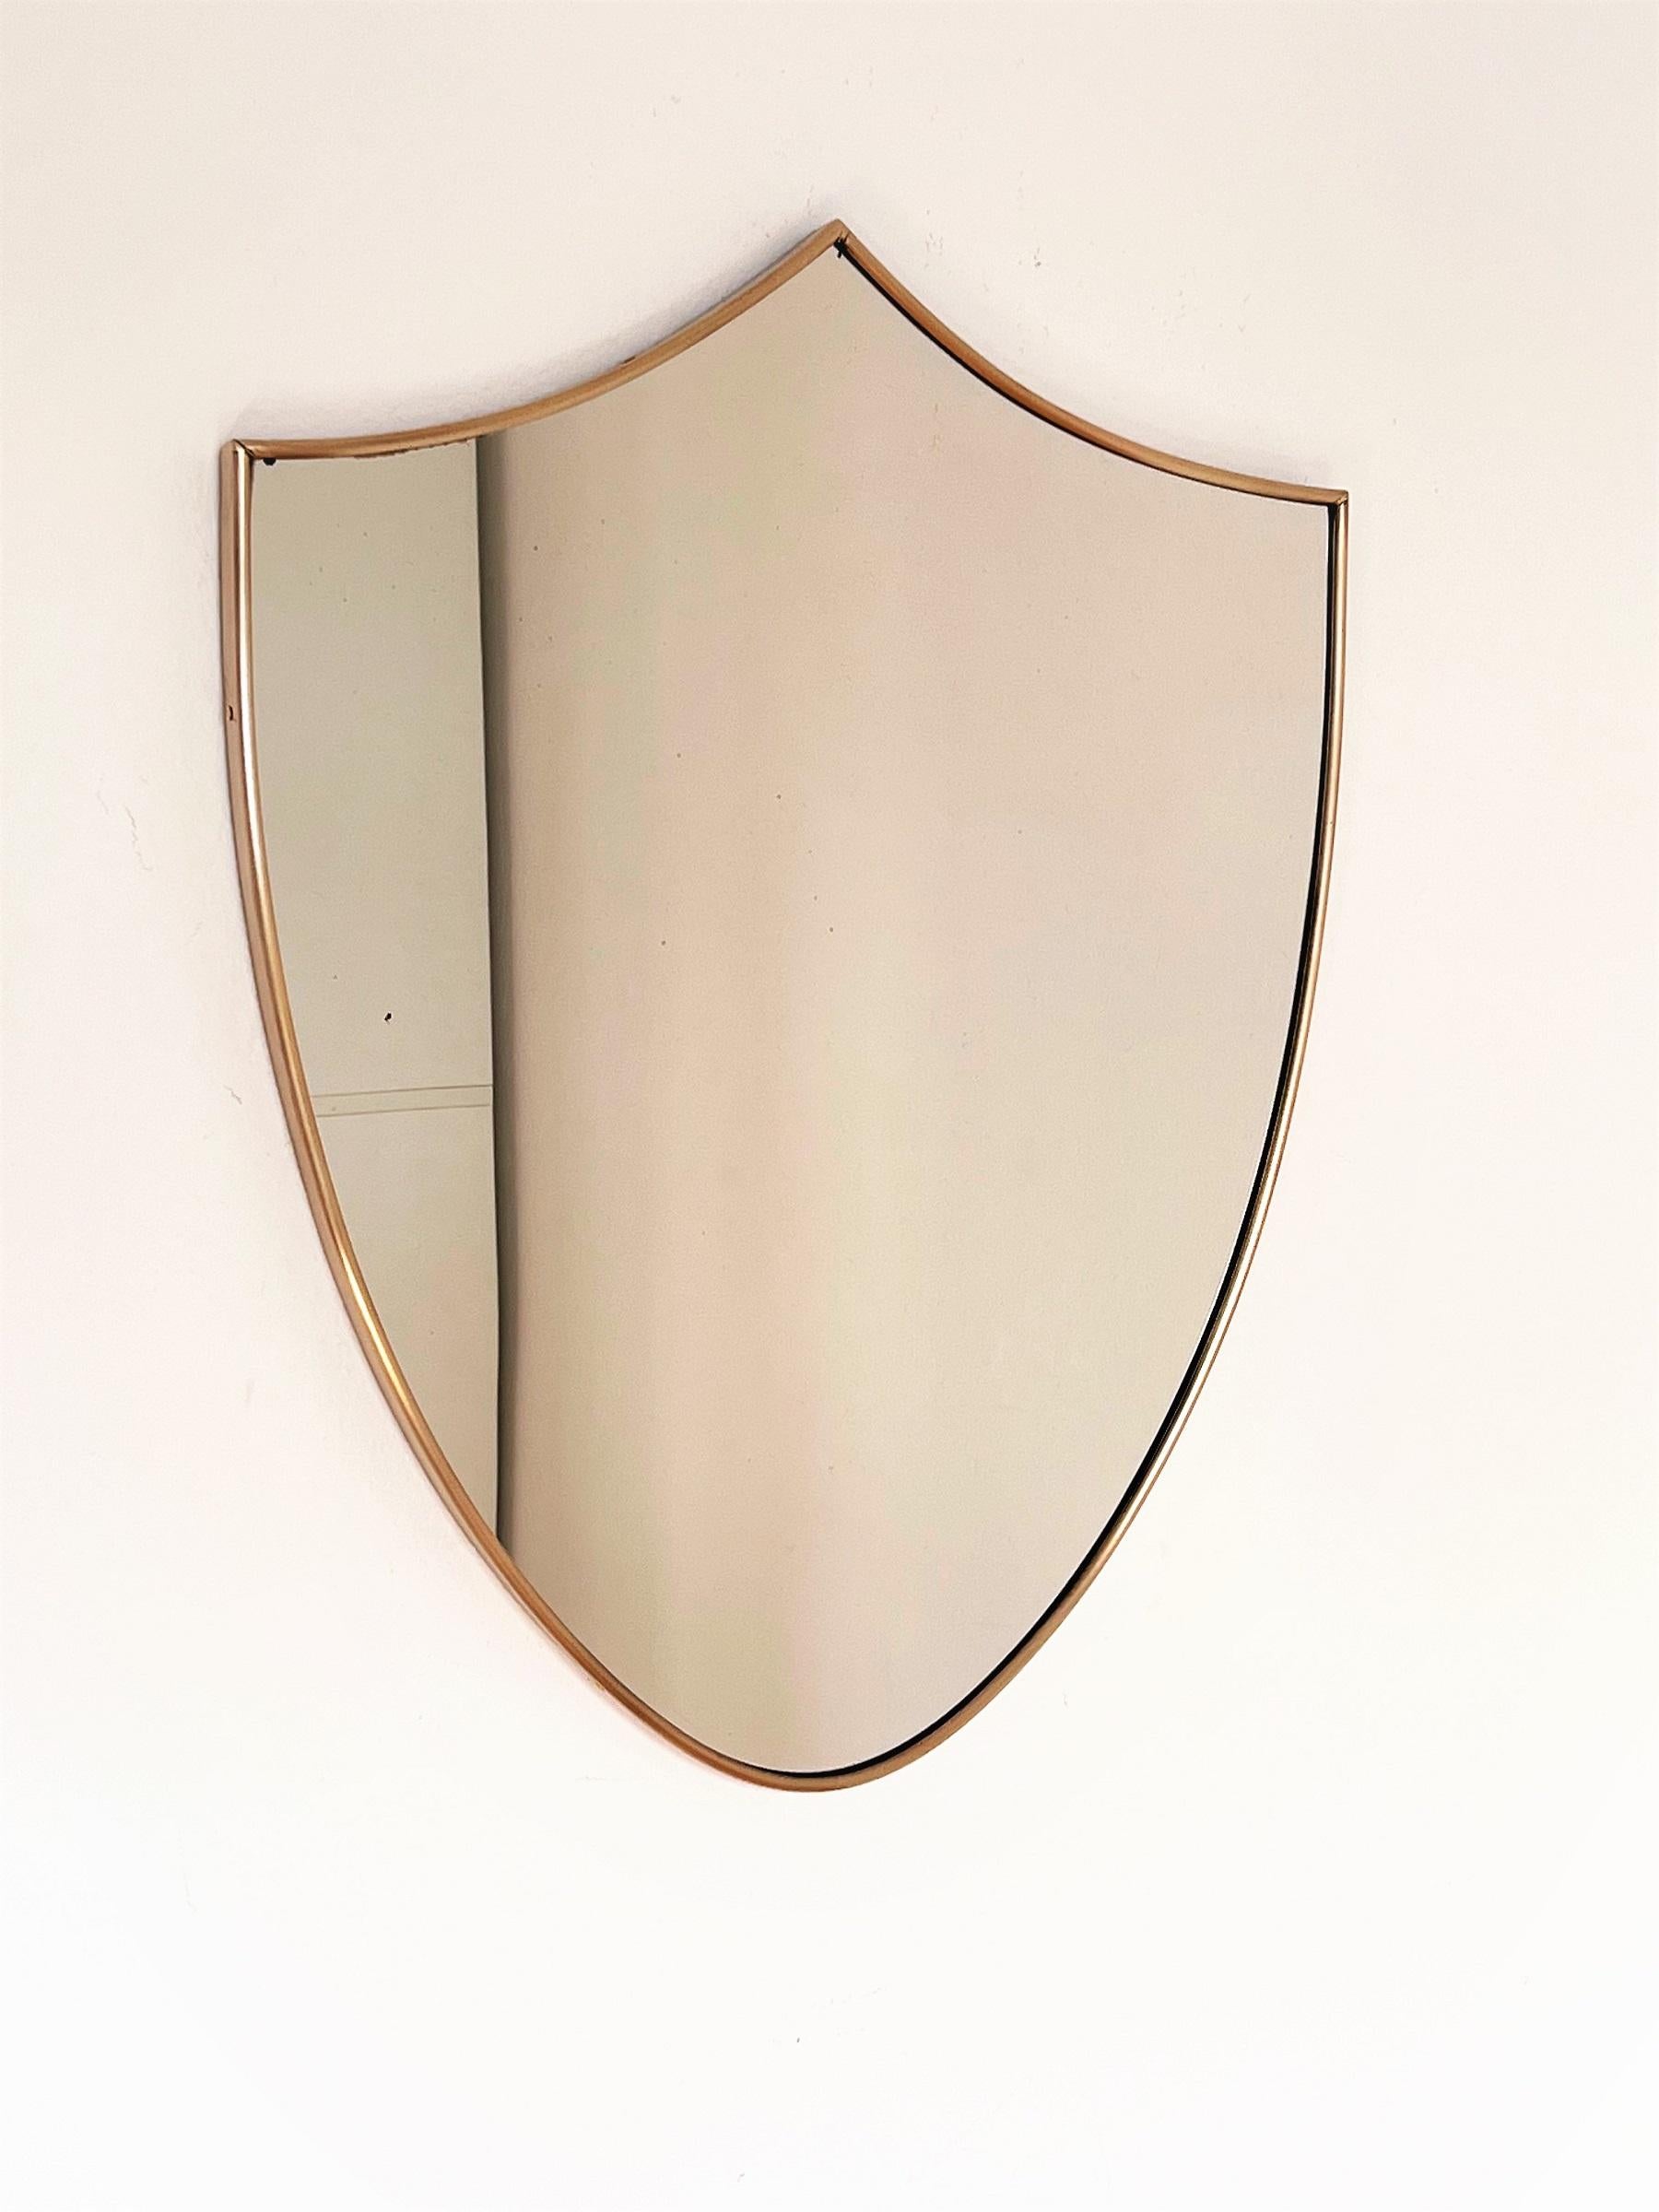 Italian Midcentury Wall Mirror with Brass Frame, 1970s For Sale 1